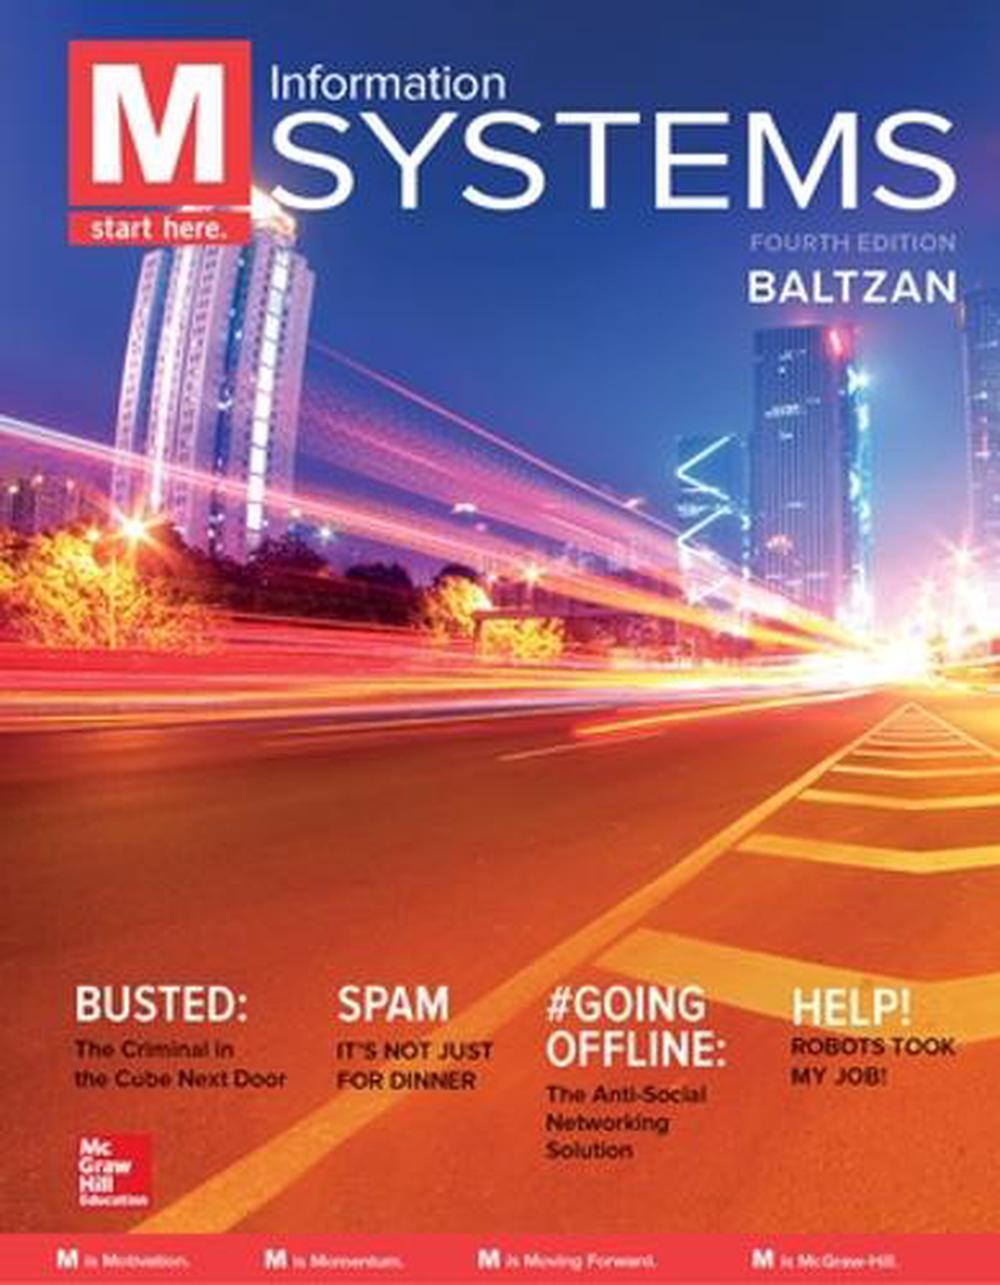 M Information Systems by Paige Baltzan (English) Paperback Book Free Shipping! 9781259814297 eBay